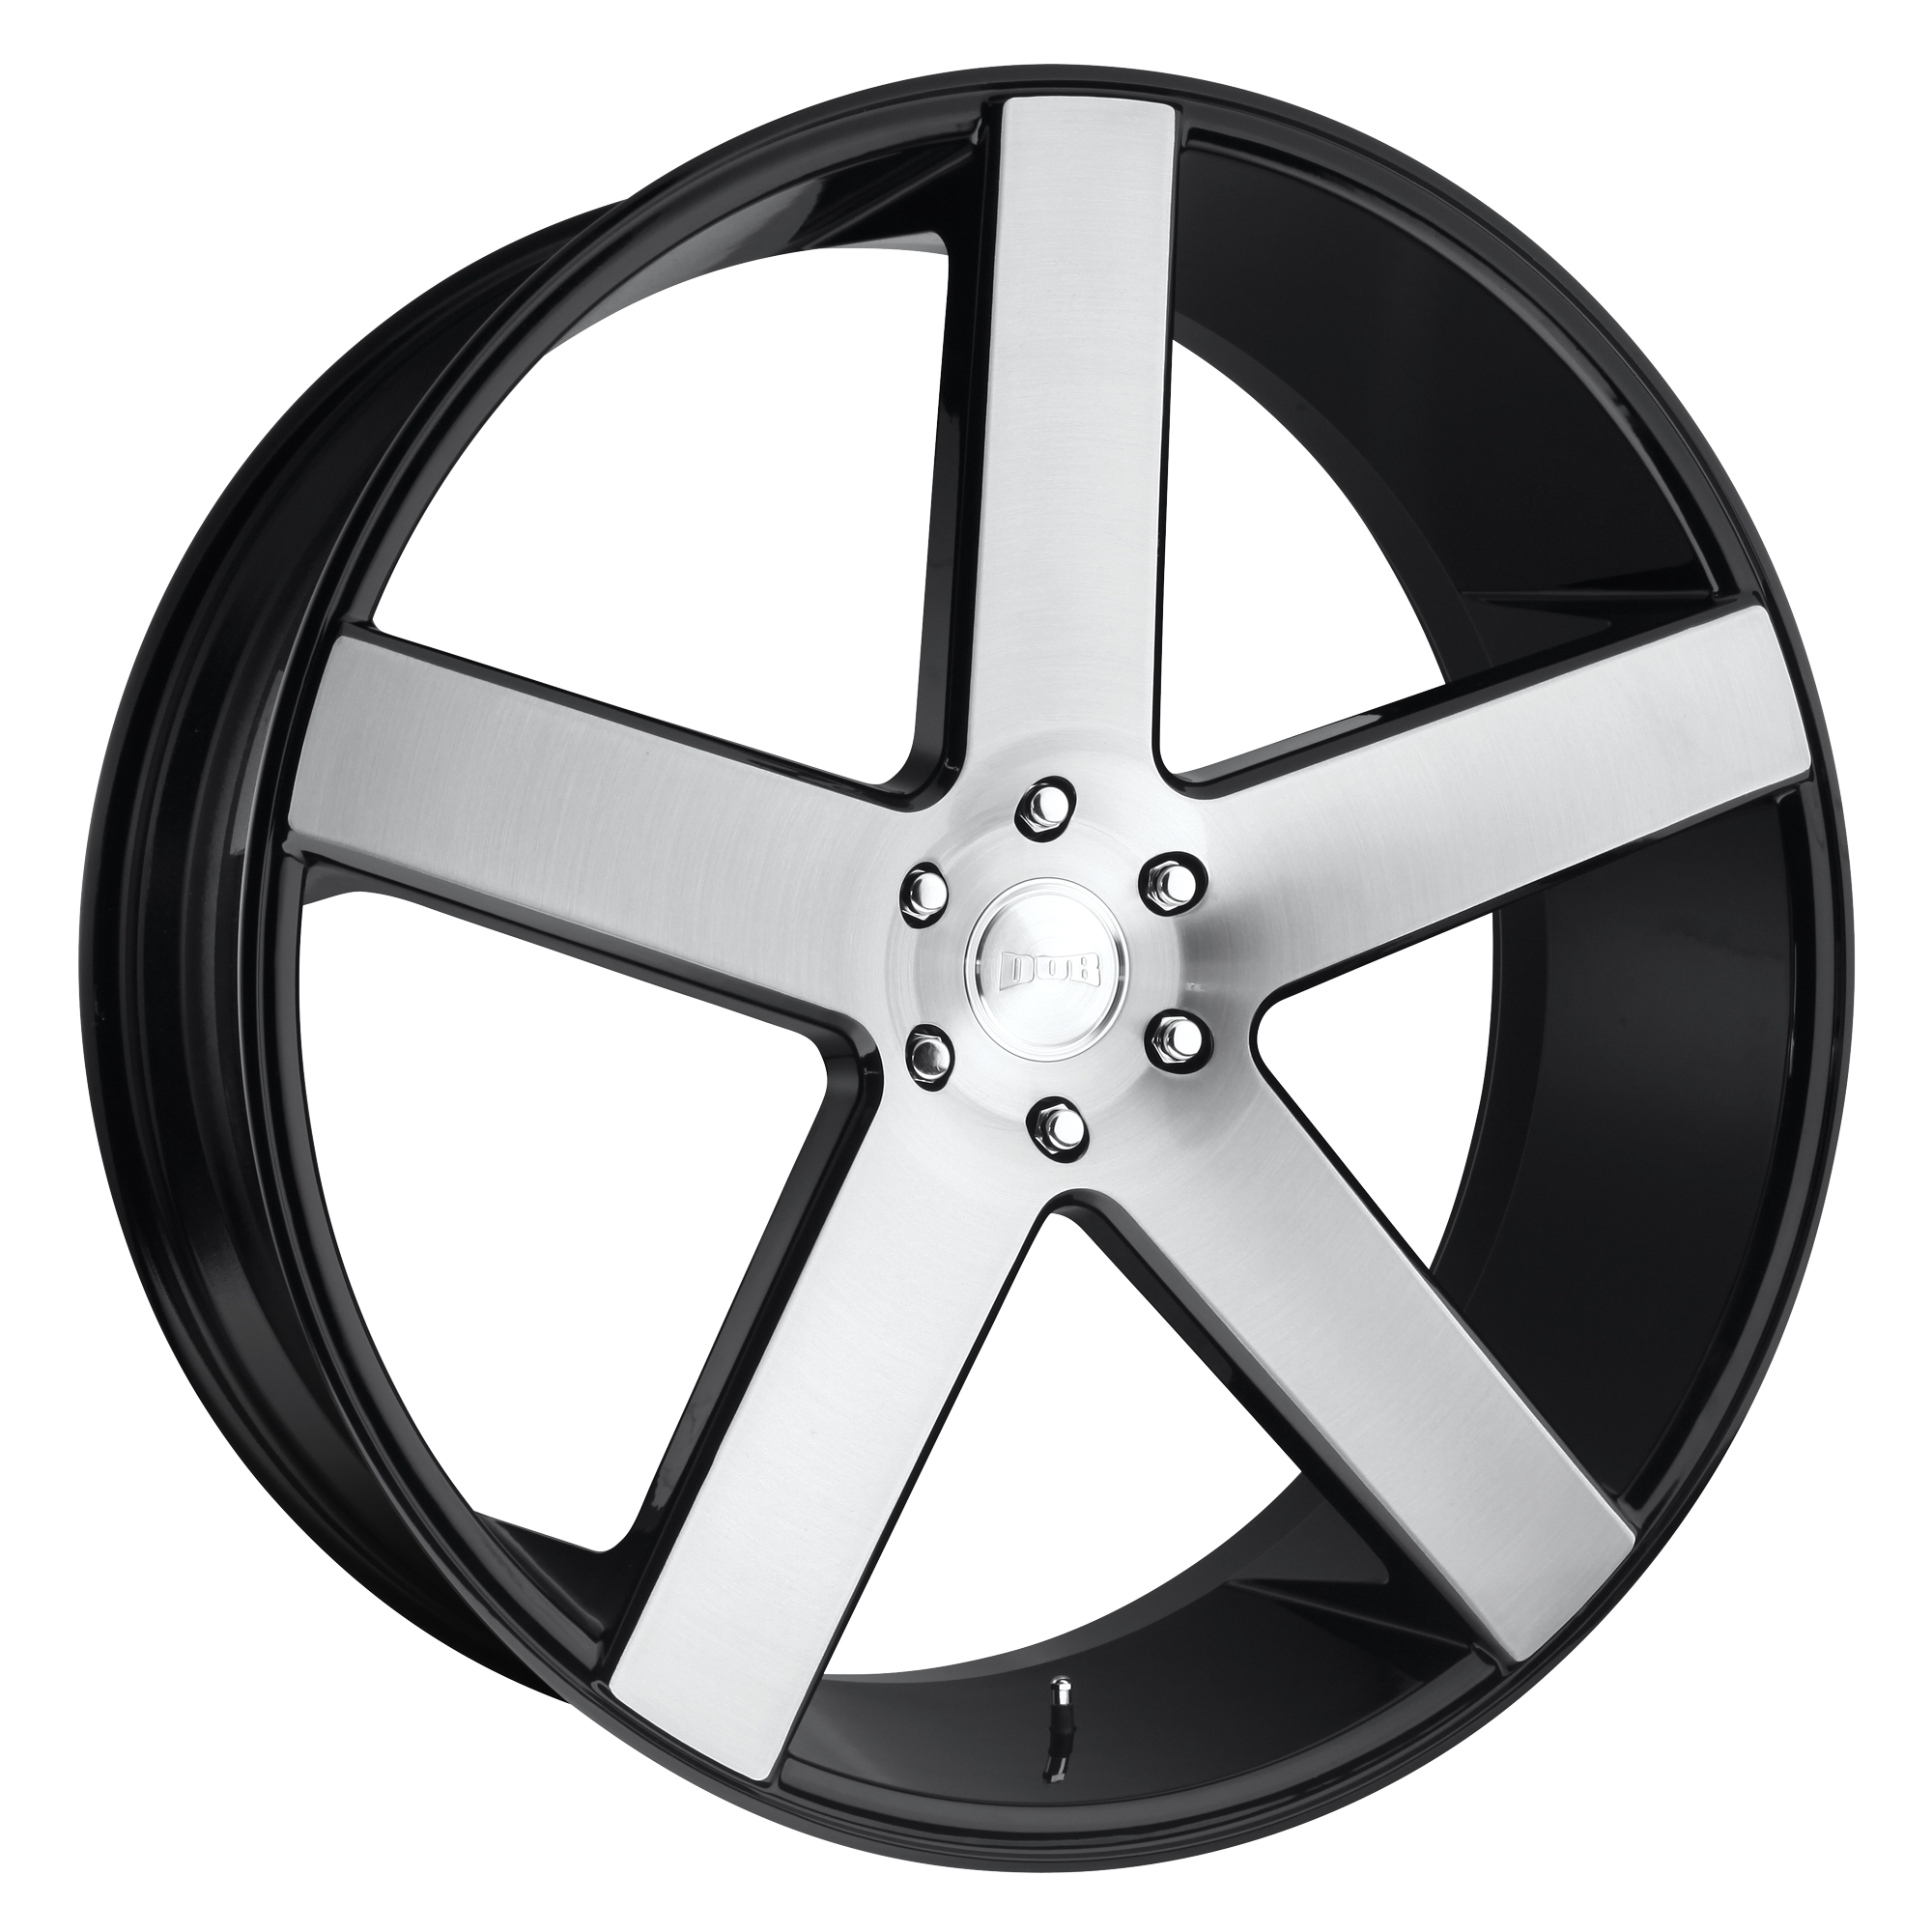 BALLER 22x9.5 6x139.70 GLOSS BLACK BRUSHED (19 mm) - Tires and Engine Performance